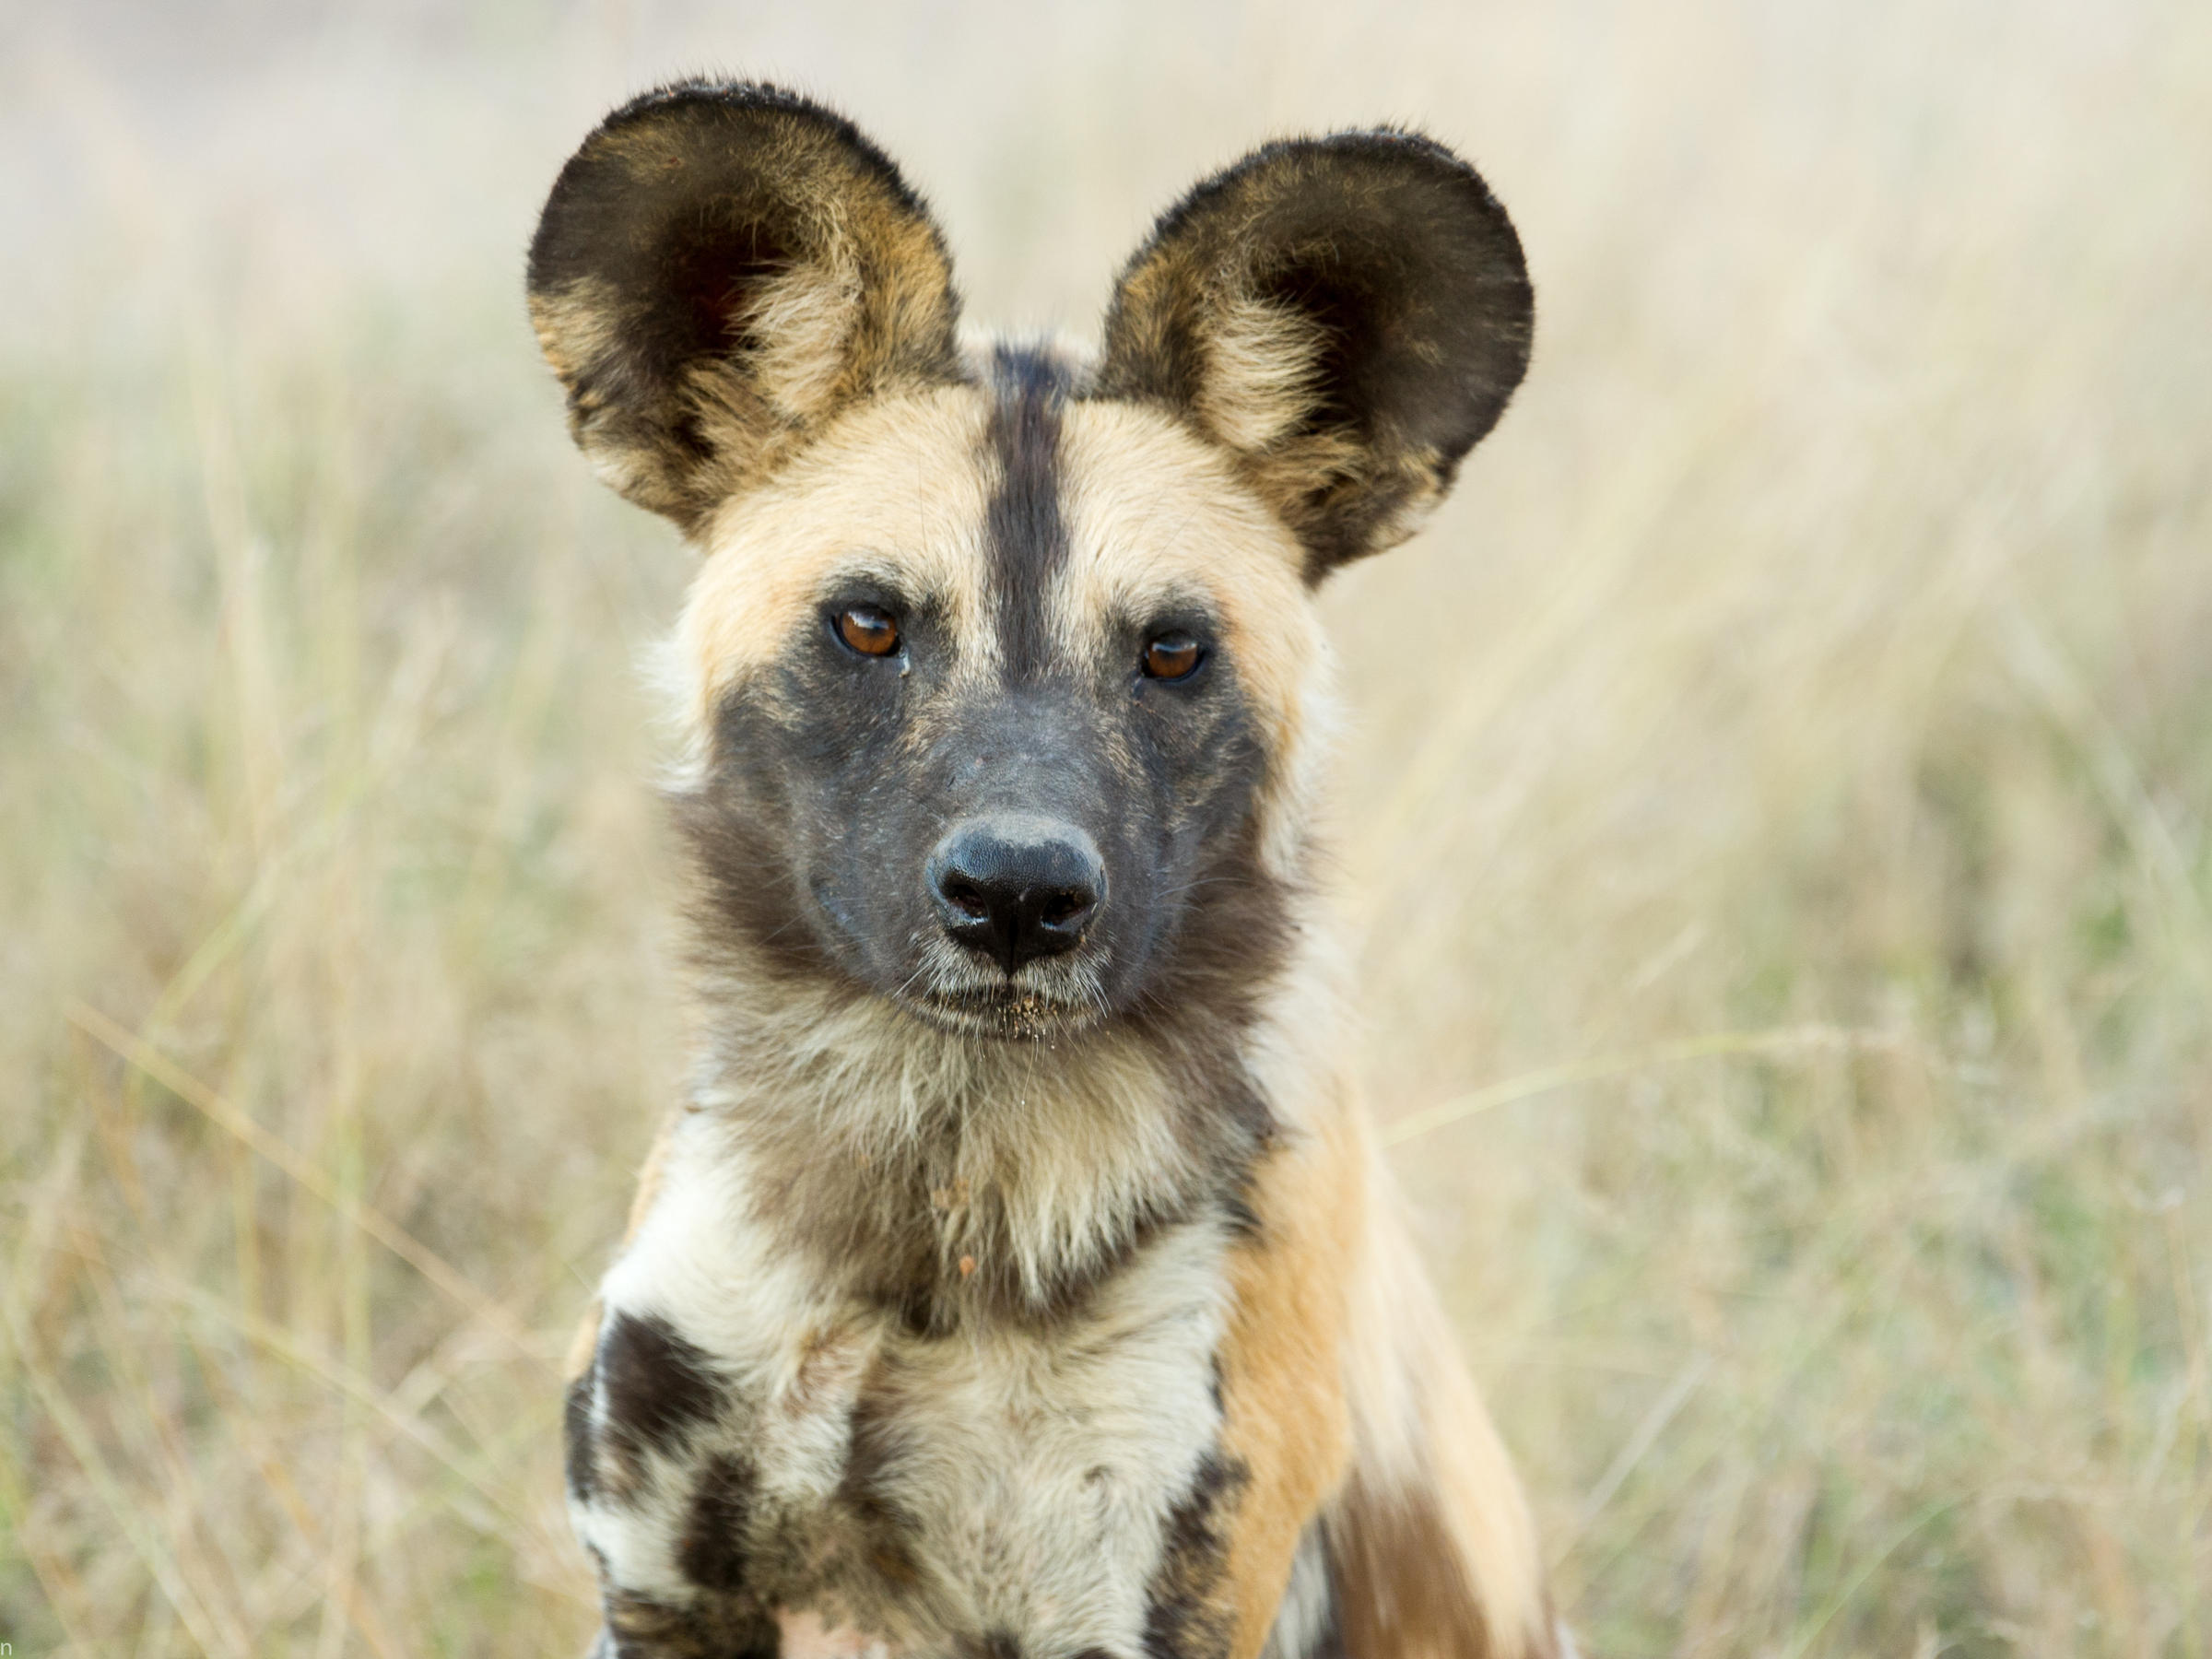 Democracy By Sneeze: When Wild Dogs Must Decide, They Vote With ...